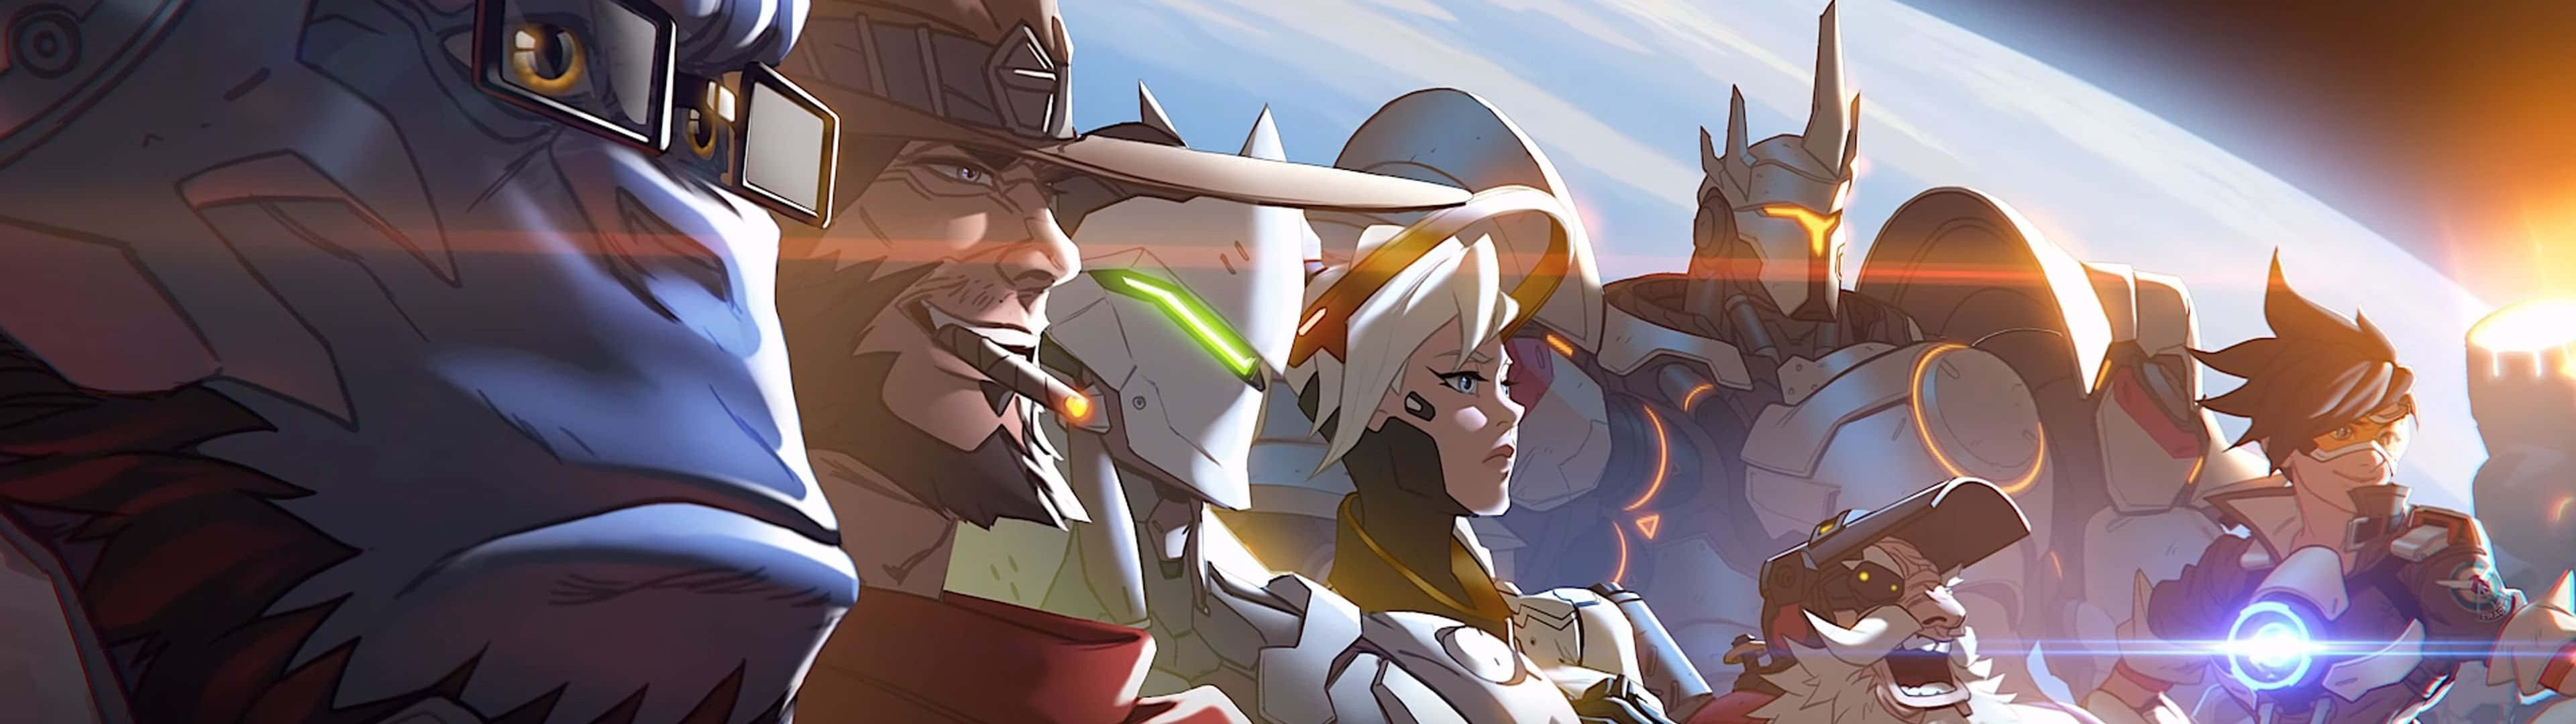 Overwatch - A Group Of Characters Standing In Front Of The Sun Wallpaper